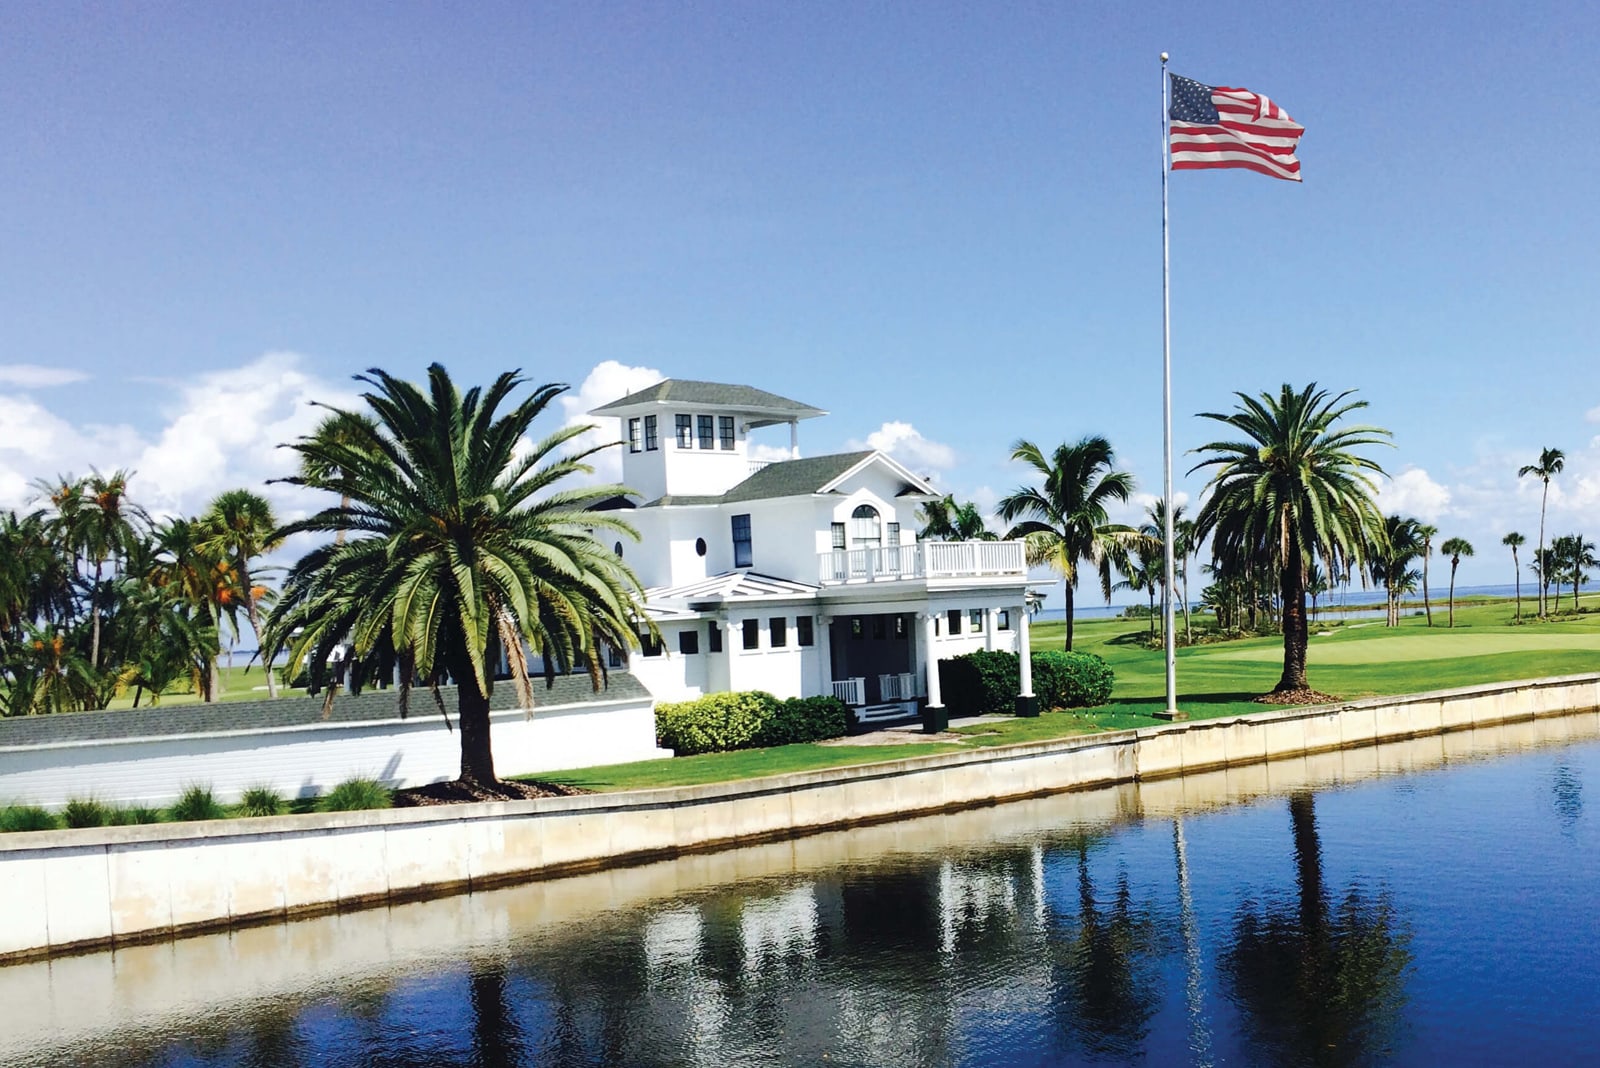 Outside shot of a building on the golf course with an American flag flying